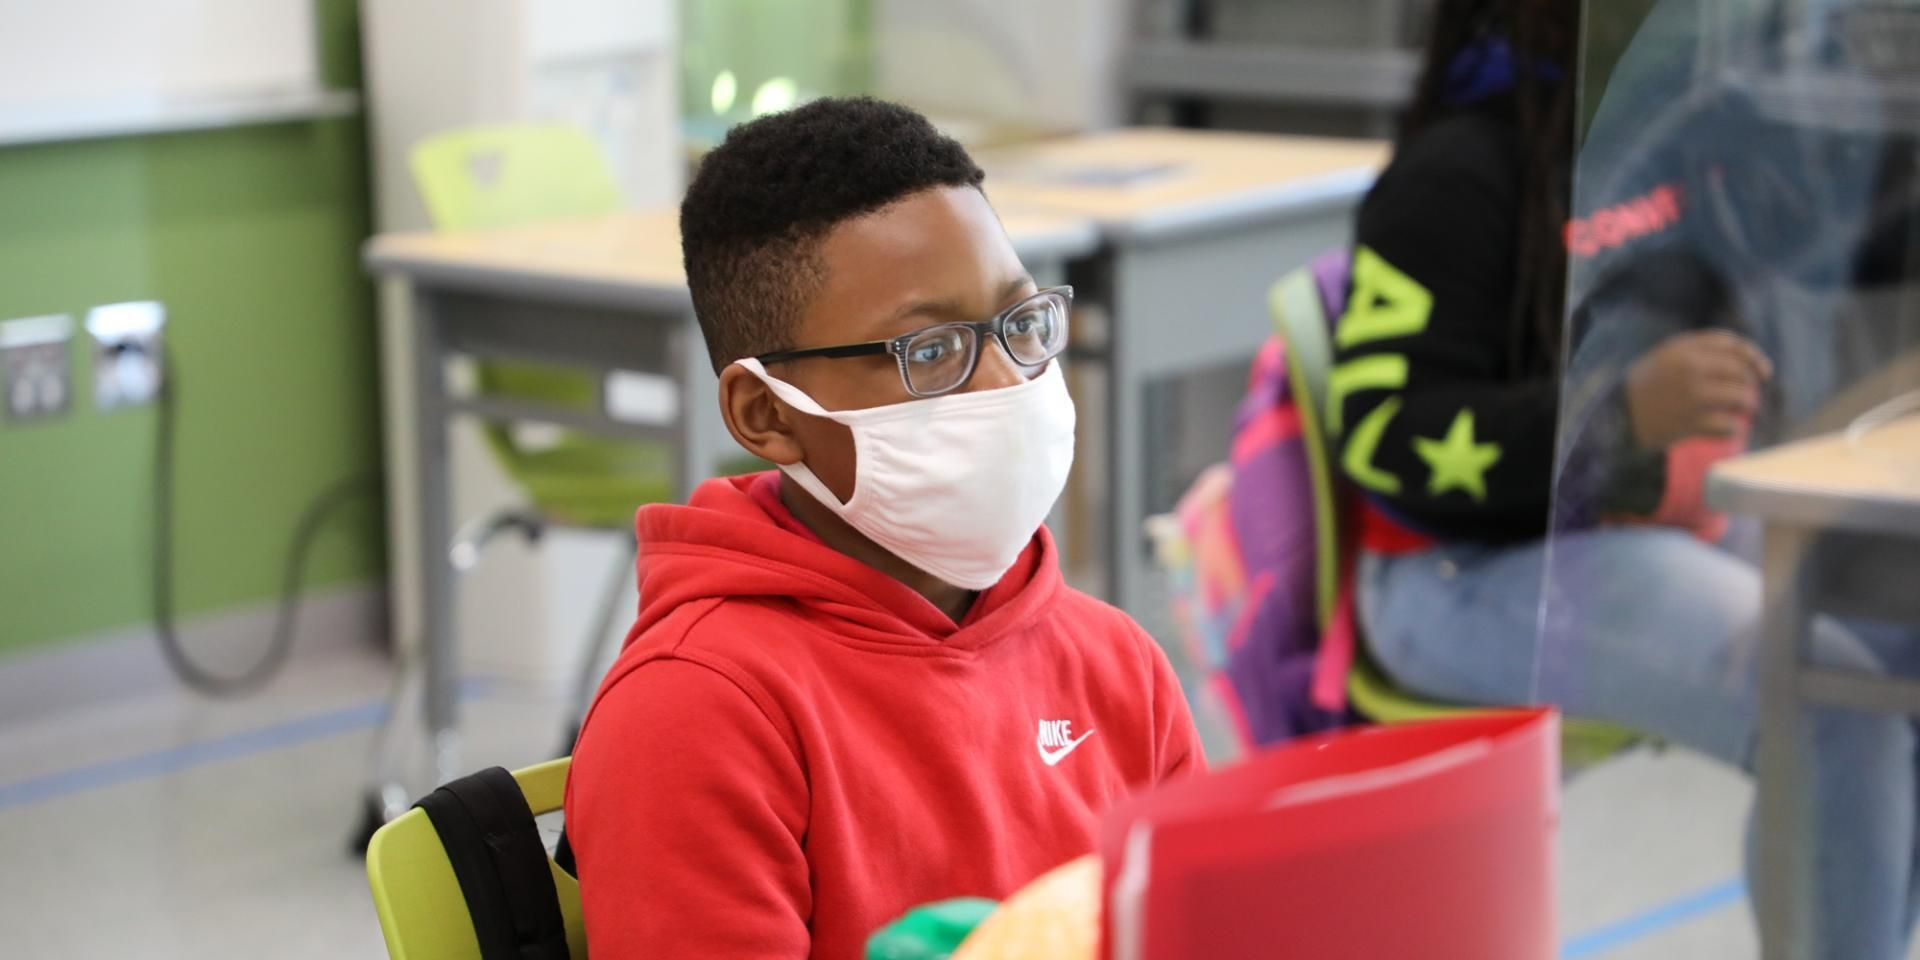 Student with face mask